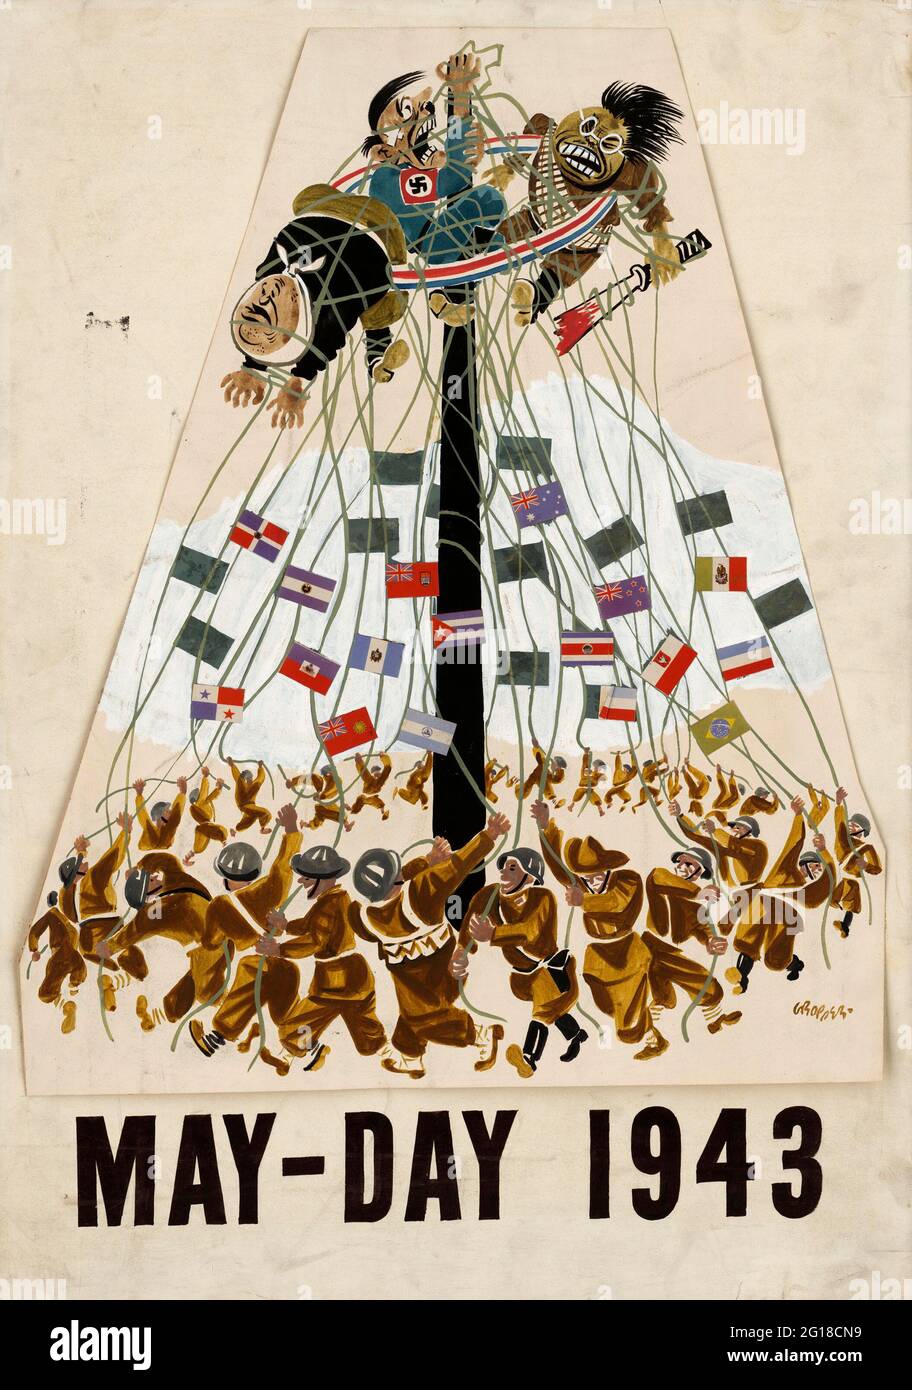 An old WW2 propaganda poster for MayDay 1943, with Allied soldiers dancing around the maypole with Hitler caught in the strings Stock Photo